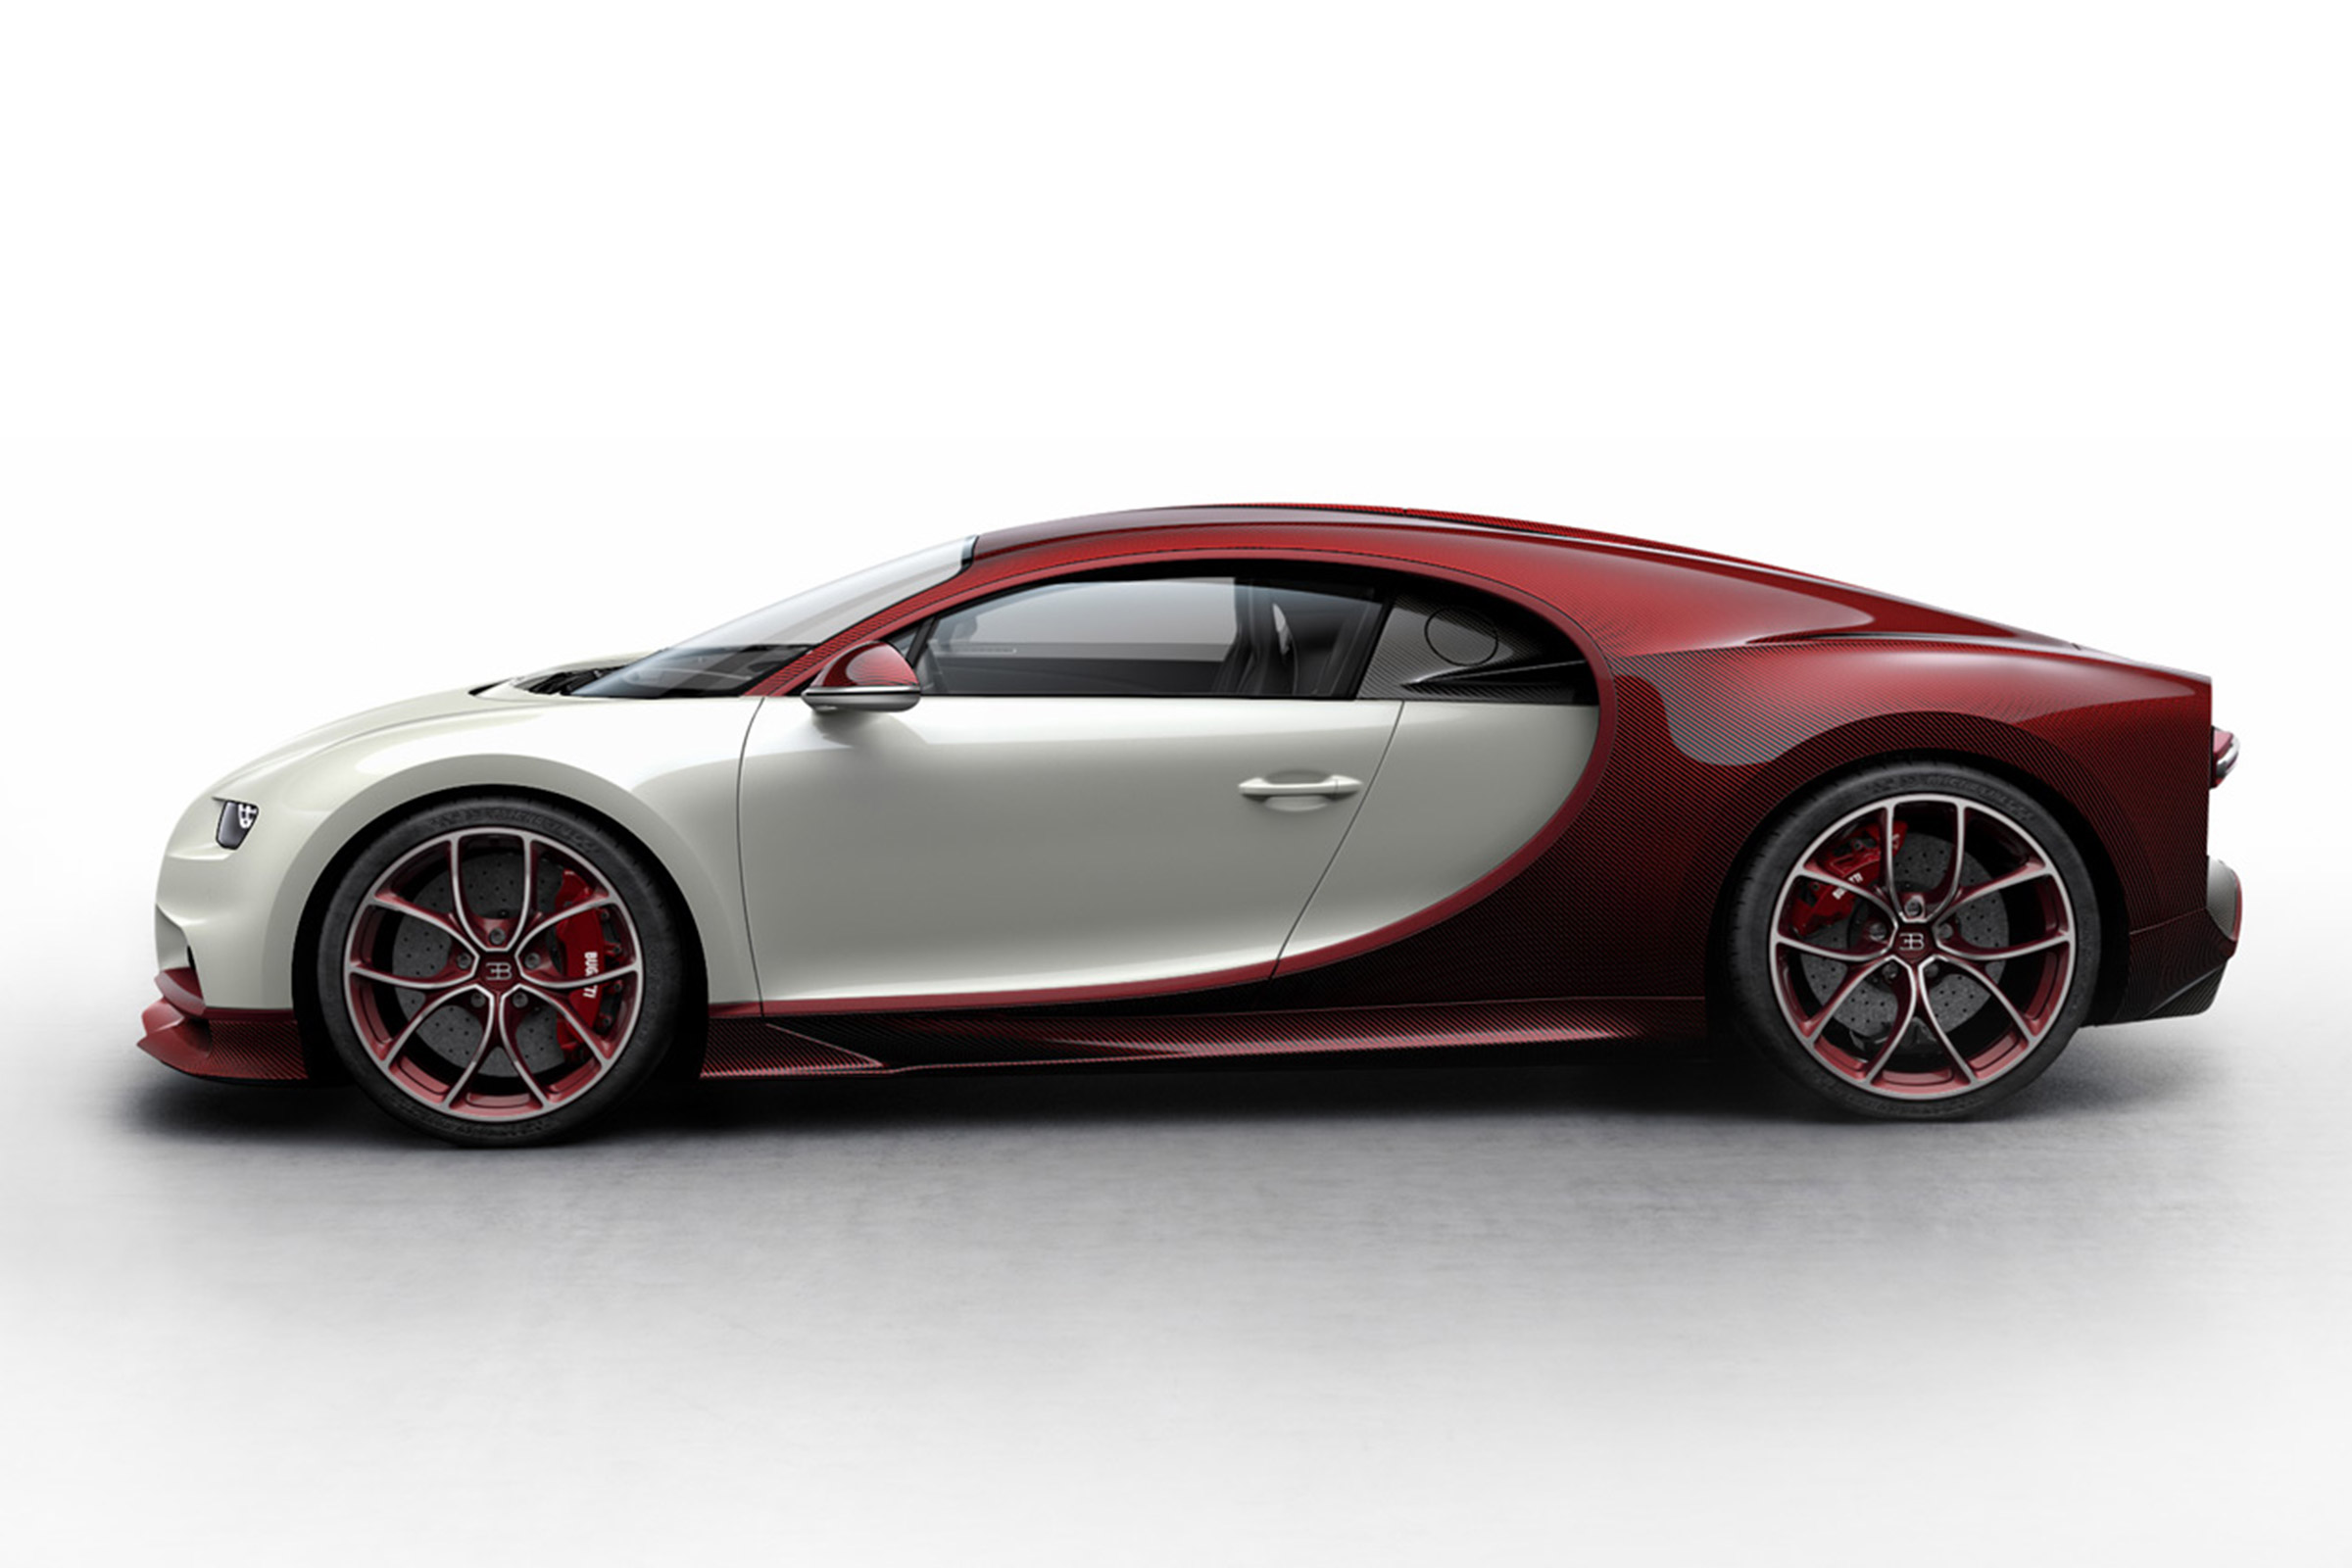 Our list of exotic cars includes the Bugatti Chiron